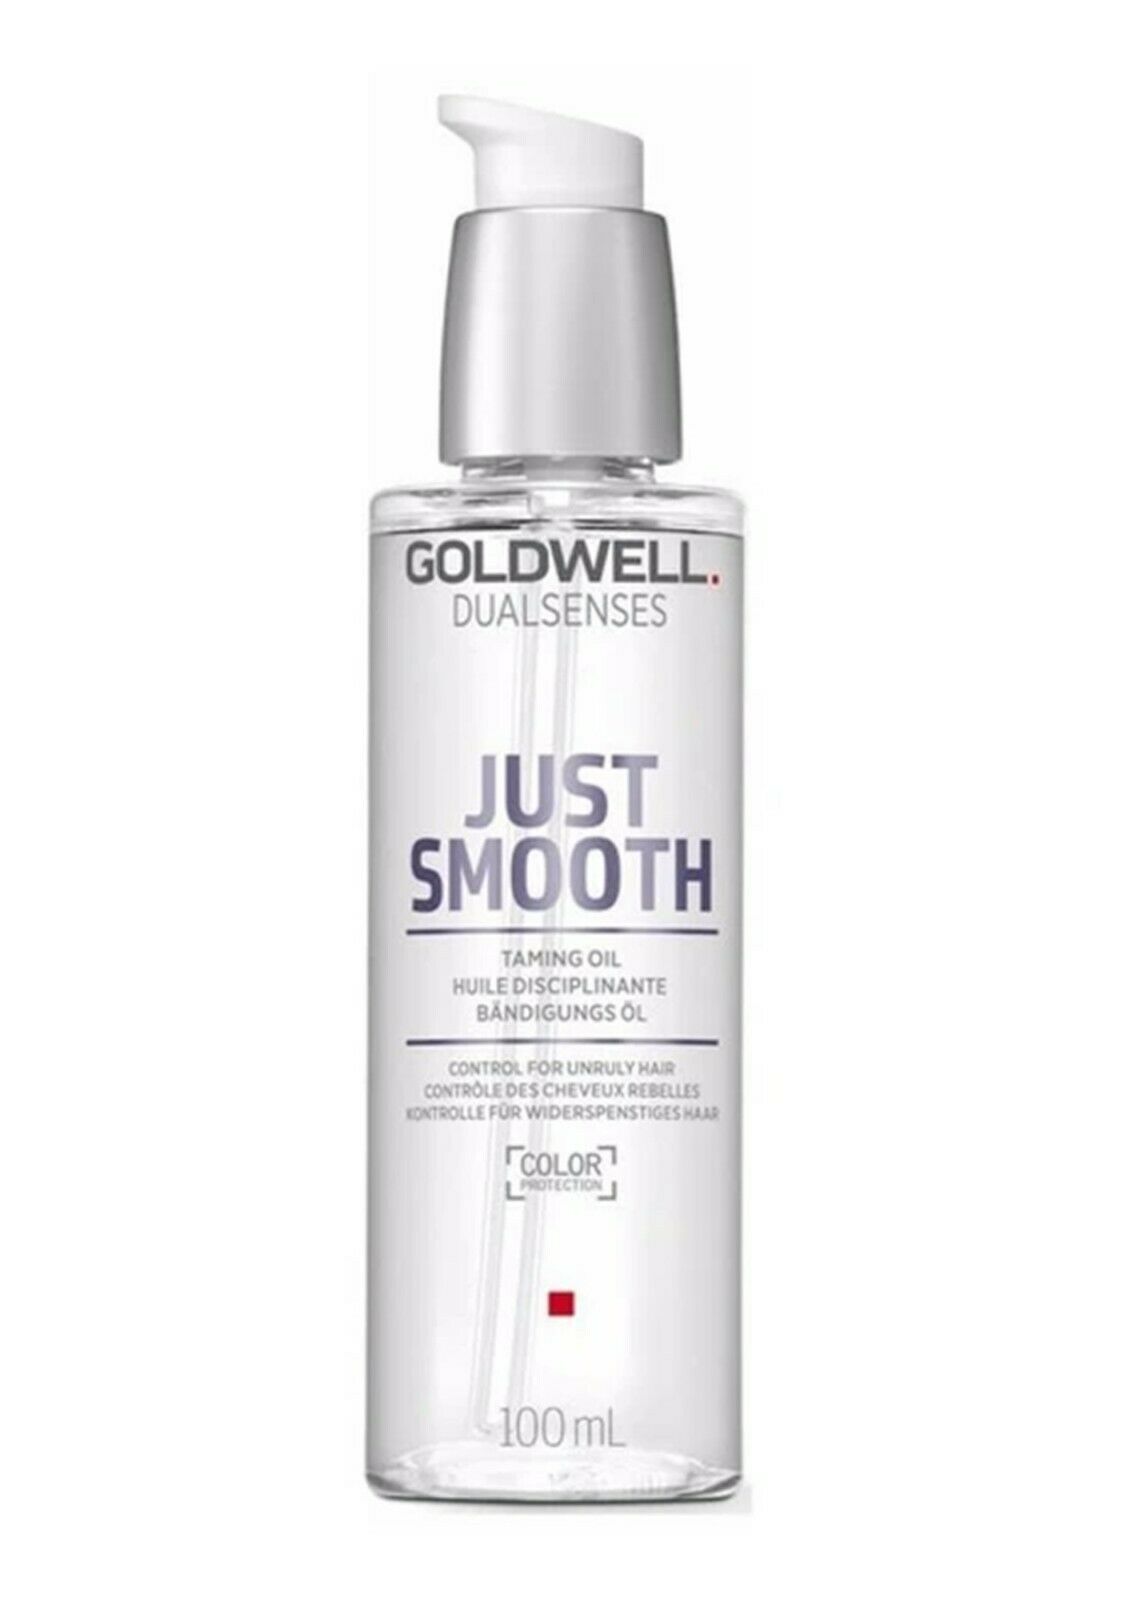 iaahhaircare,Goldwell Dualsenses just smooth taming oil 100ml,Shampoos & Conditioners,Goldwell